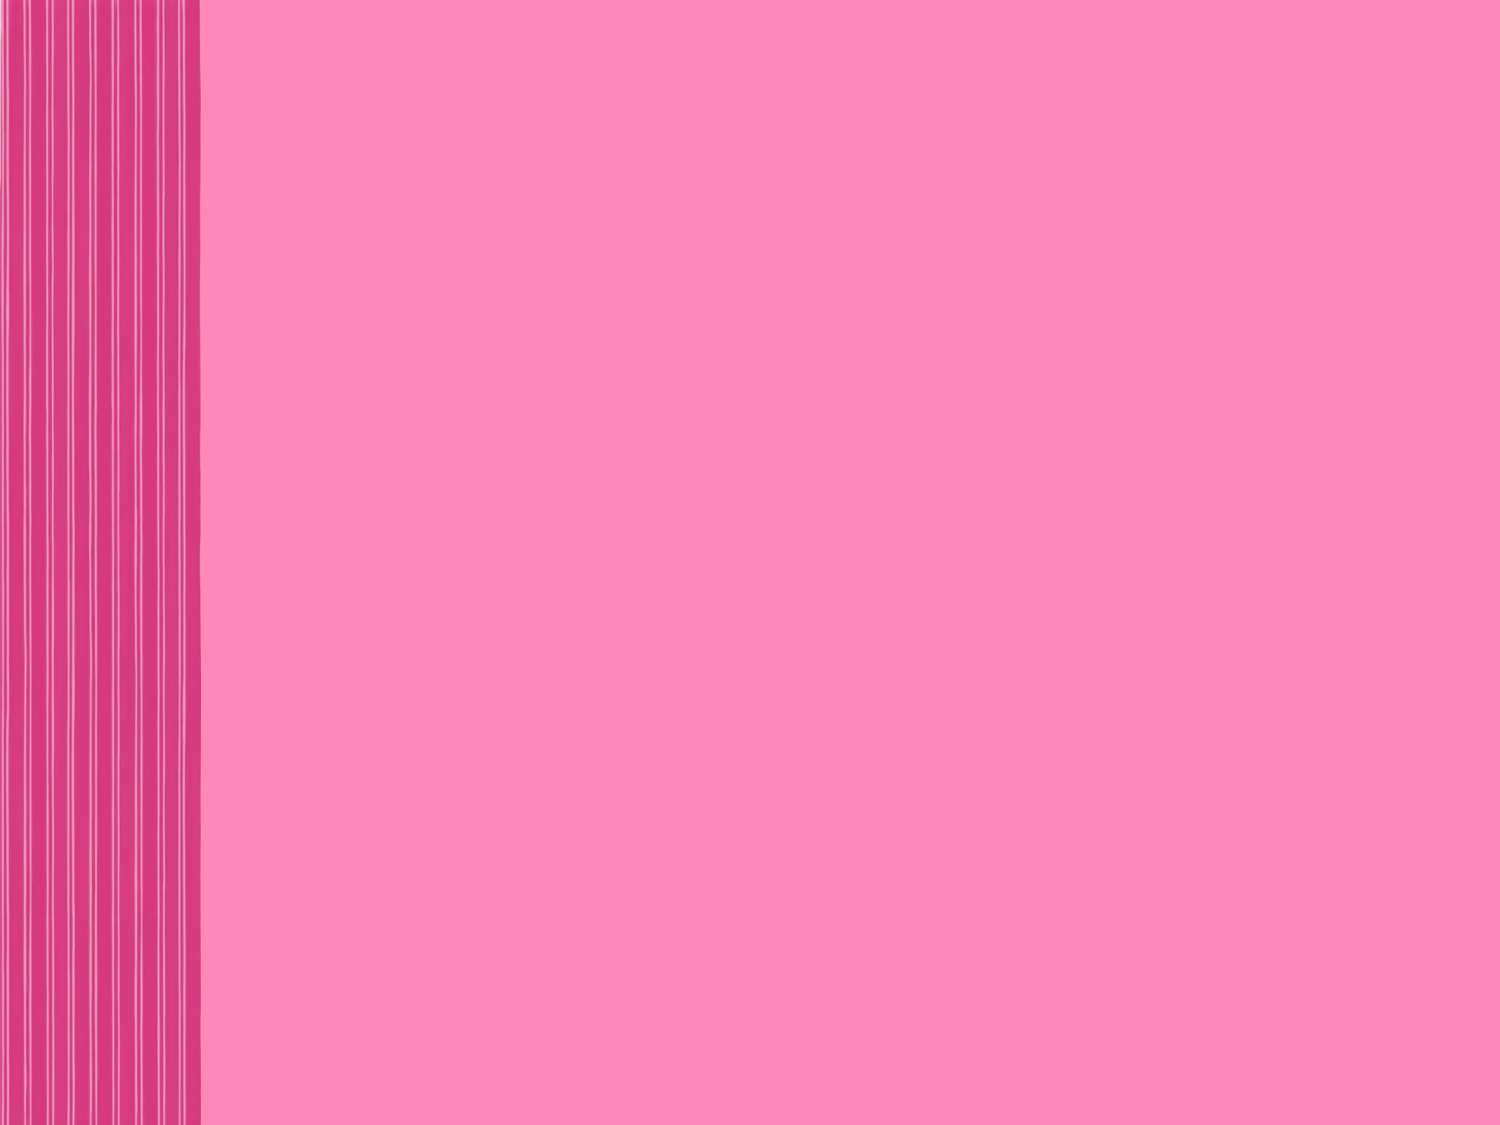 Multi Stripe Side Bar Pink Free PPT Backgrounds for your